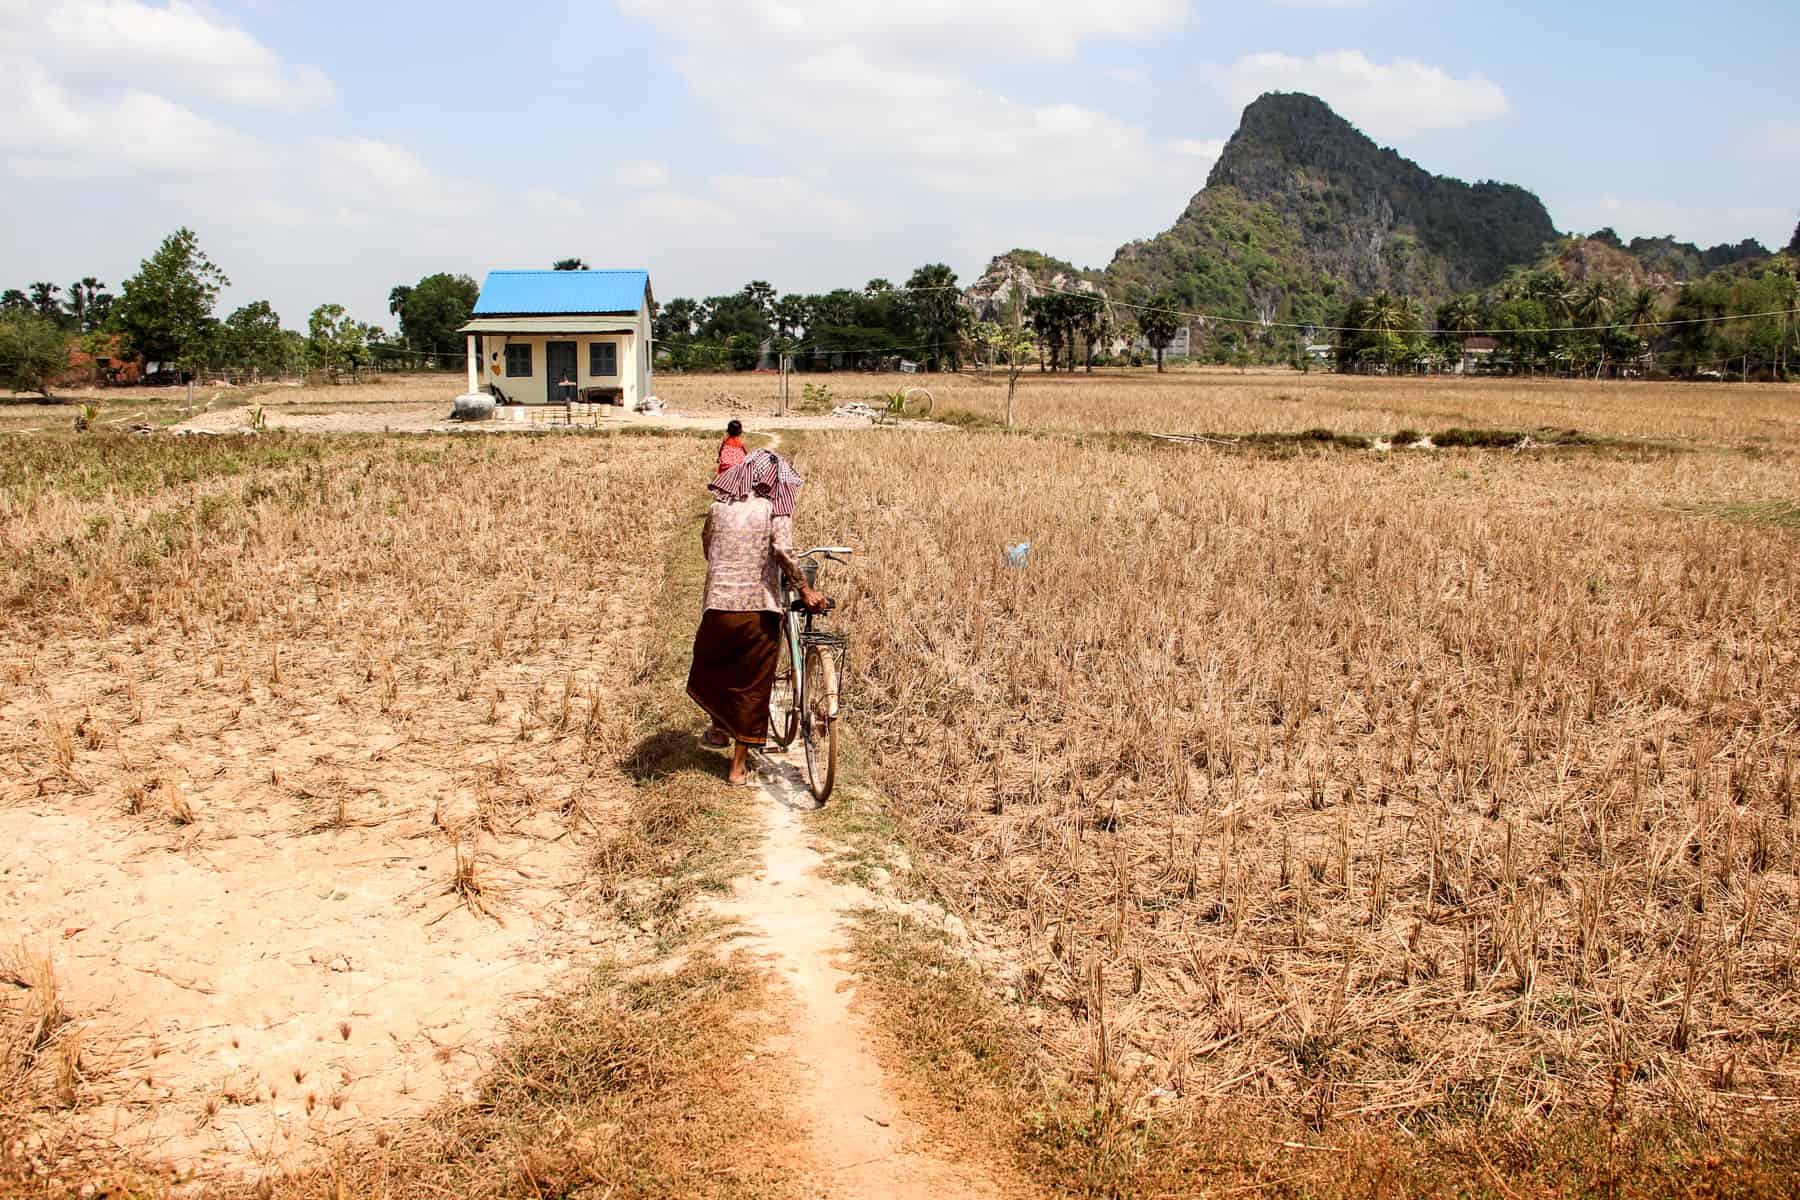 A woman pushes her bike through a dry rice paddy field towards a white house with a blue roof that stands in front of a tall, prominent rock.